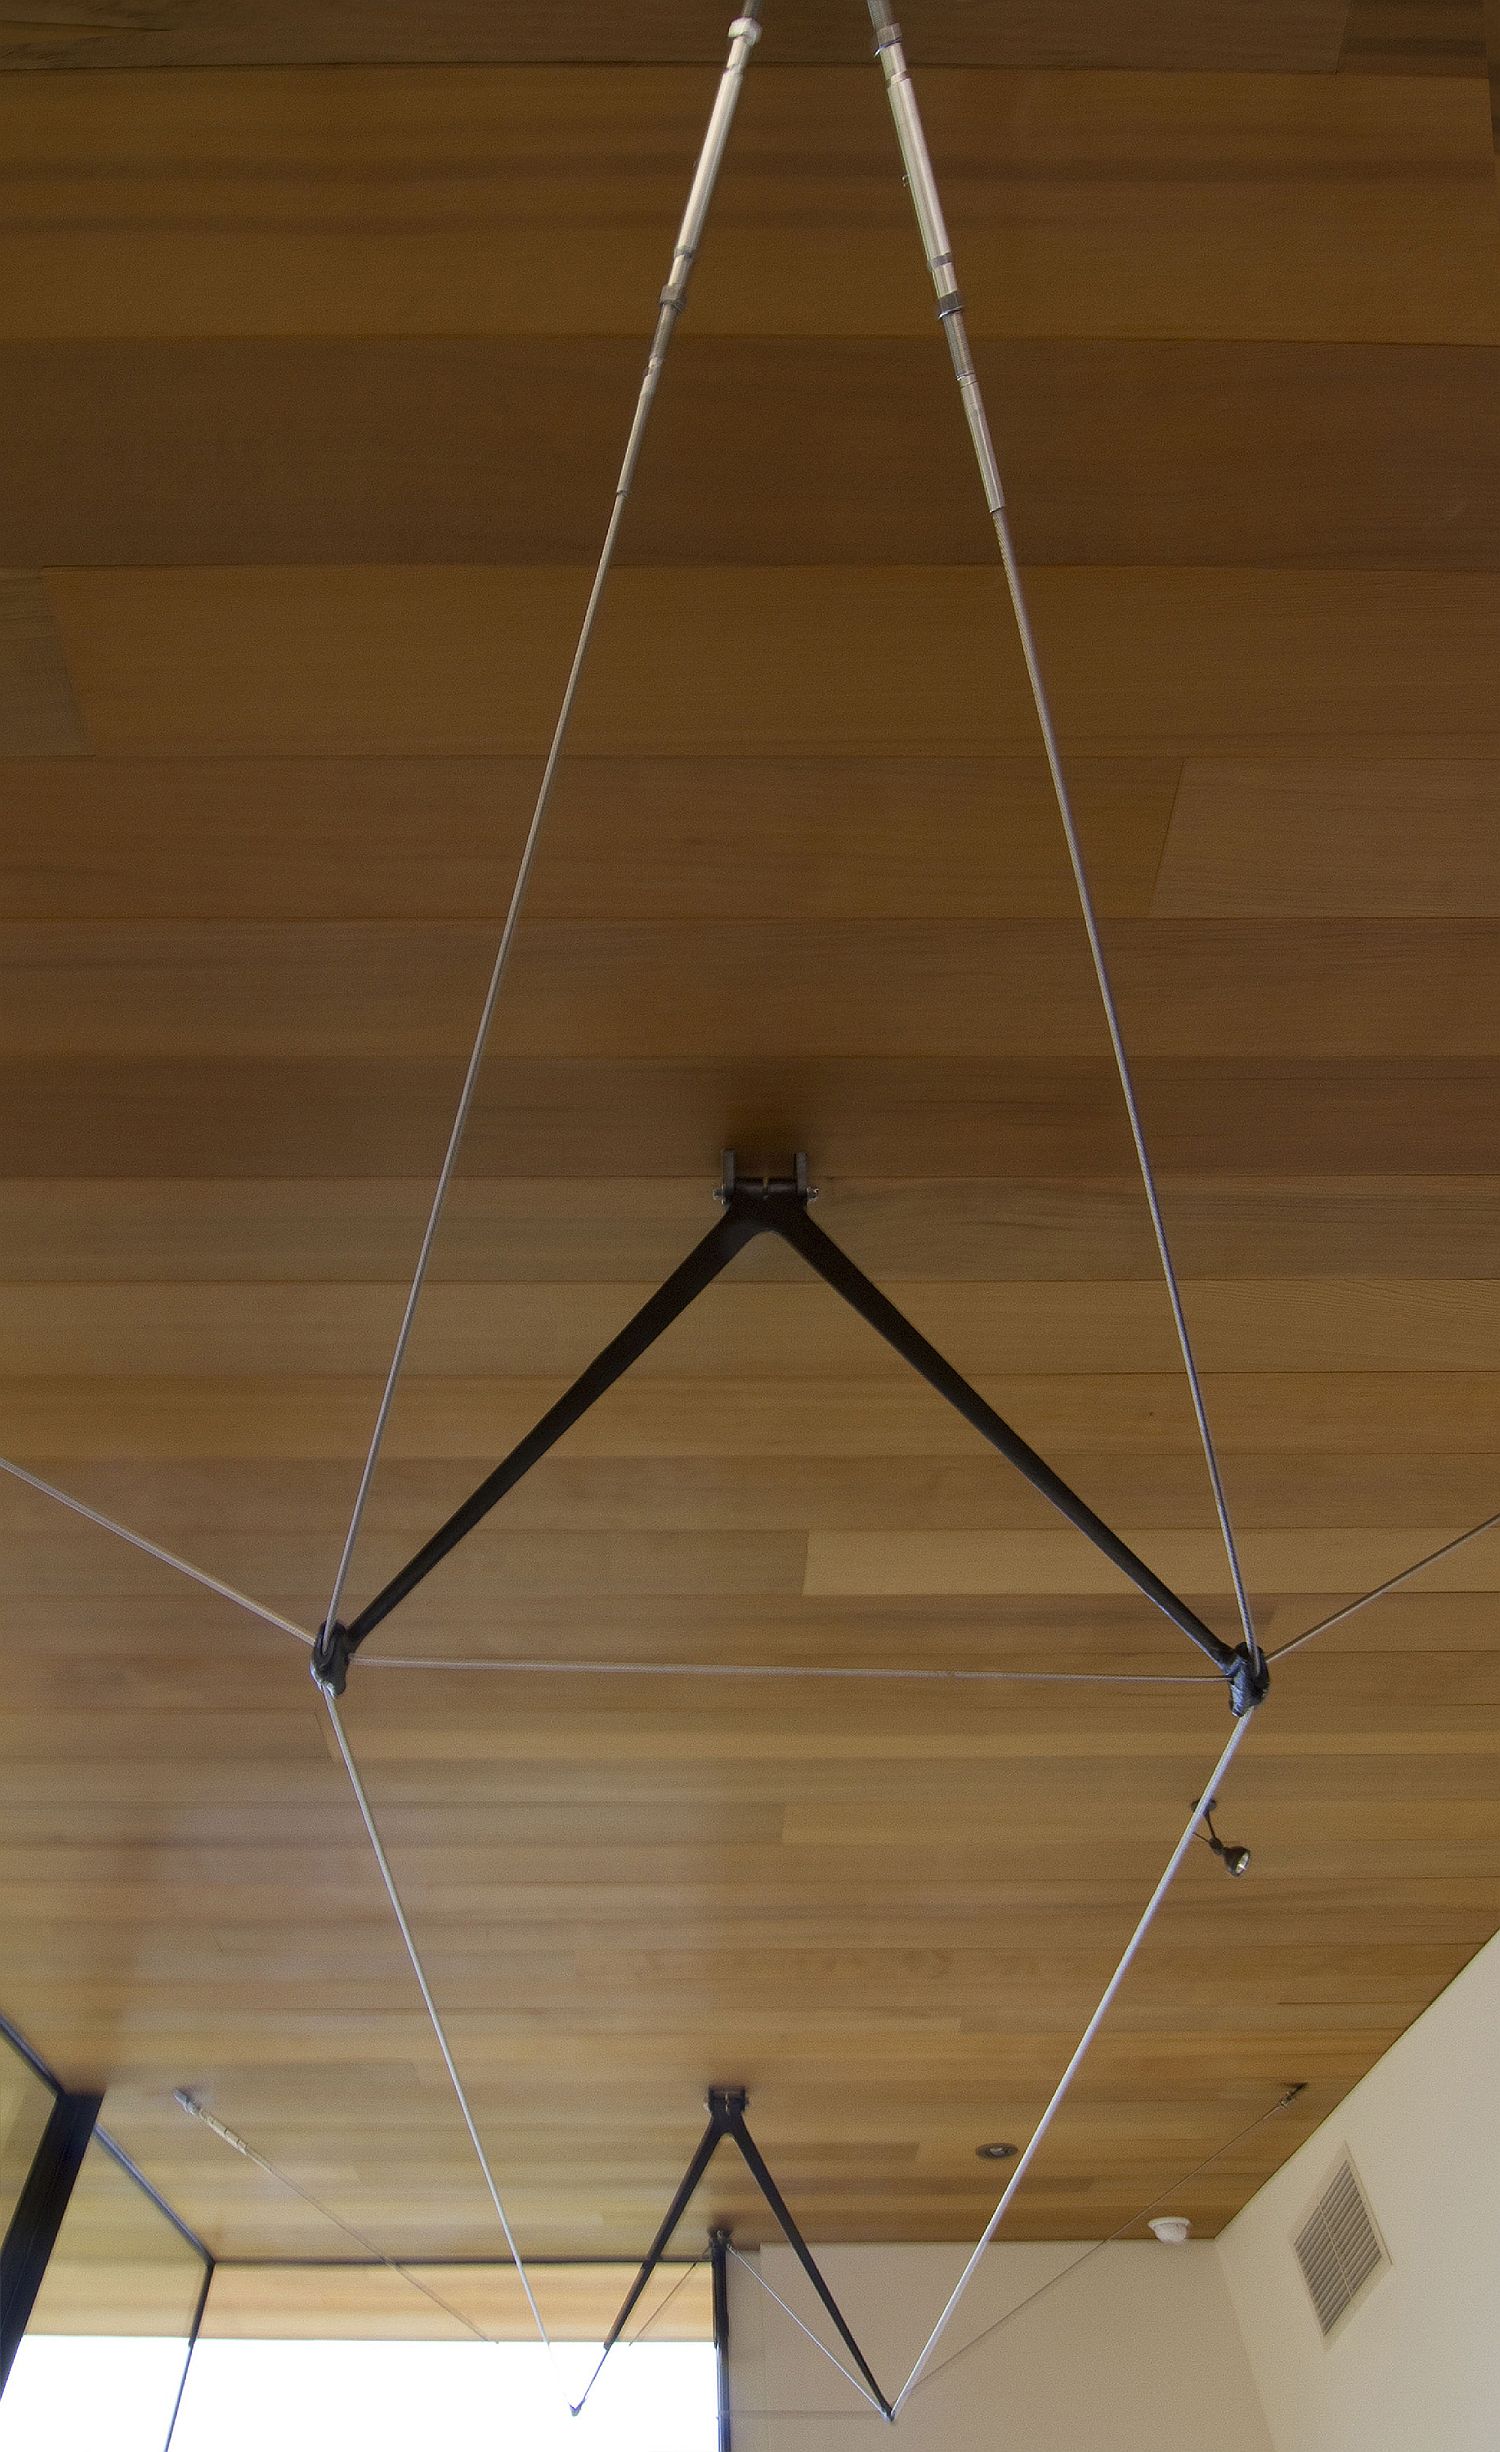 Cast steel struts in a three-dimensional cable truss system support the cantilevered roof